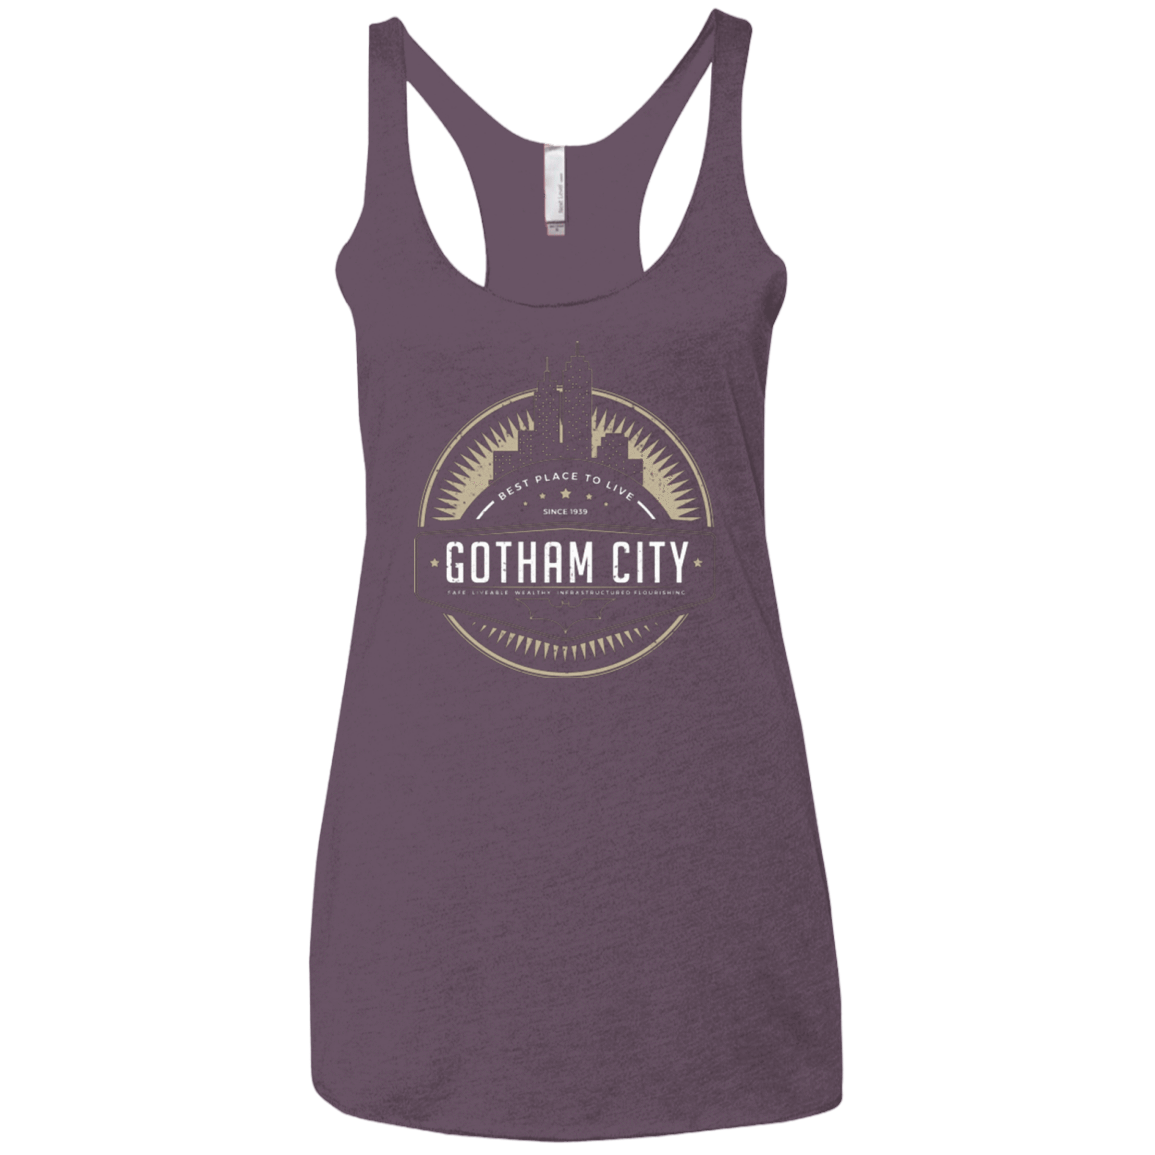 T-Shirts Vintage Purple / X-Small Best Place To Live Women's Triblend Racerback Tank